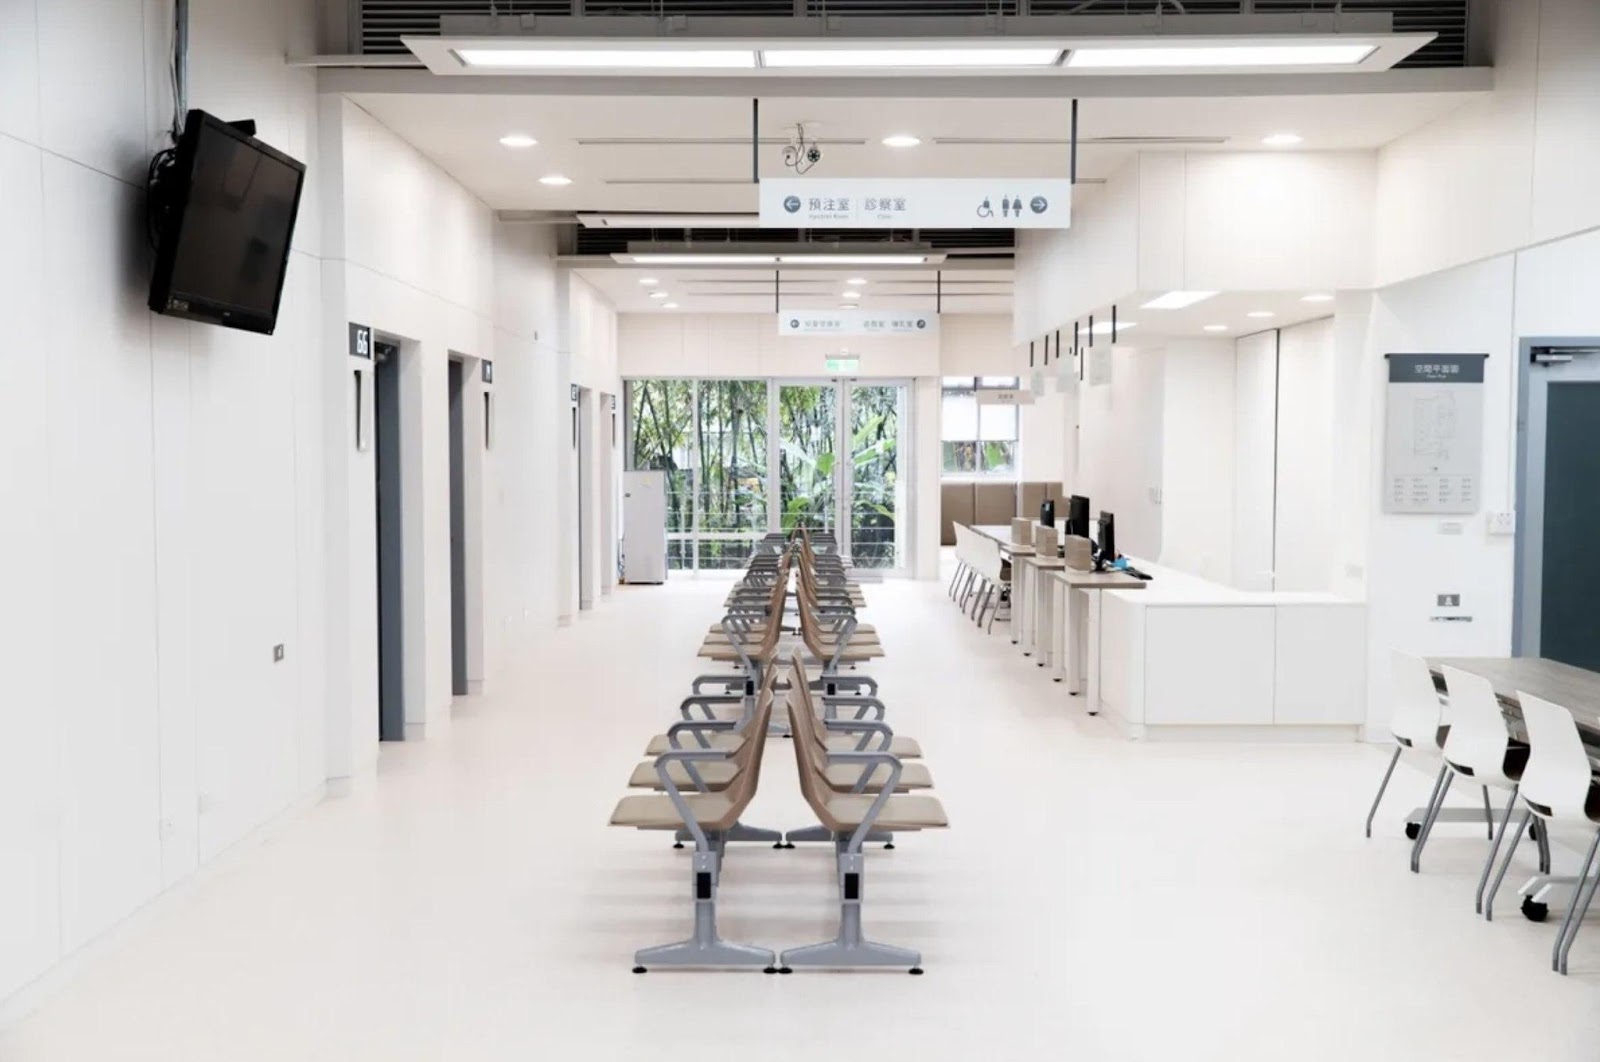 The Xizhi District Health Center in New Taipei City has bright and clear signage and a spacious layout, breaking the existing stereotypes for health centers.